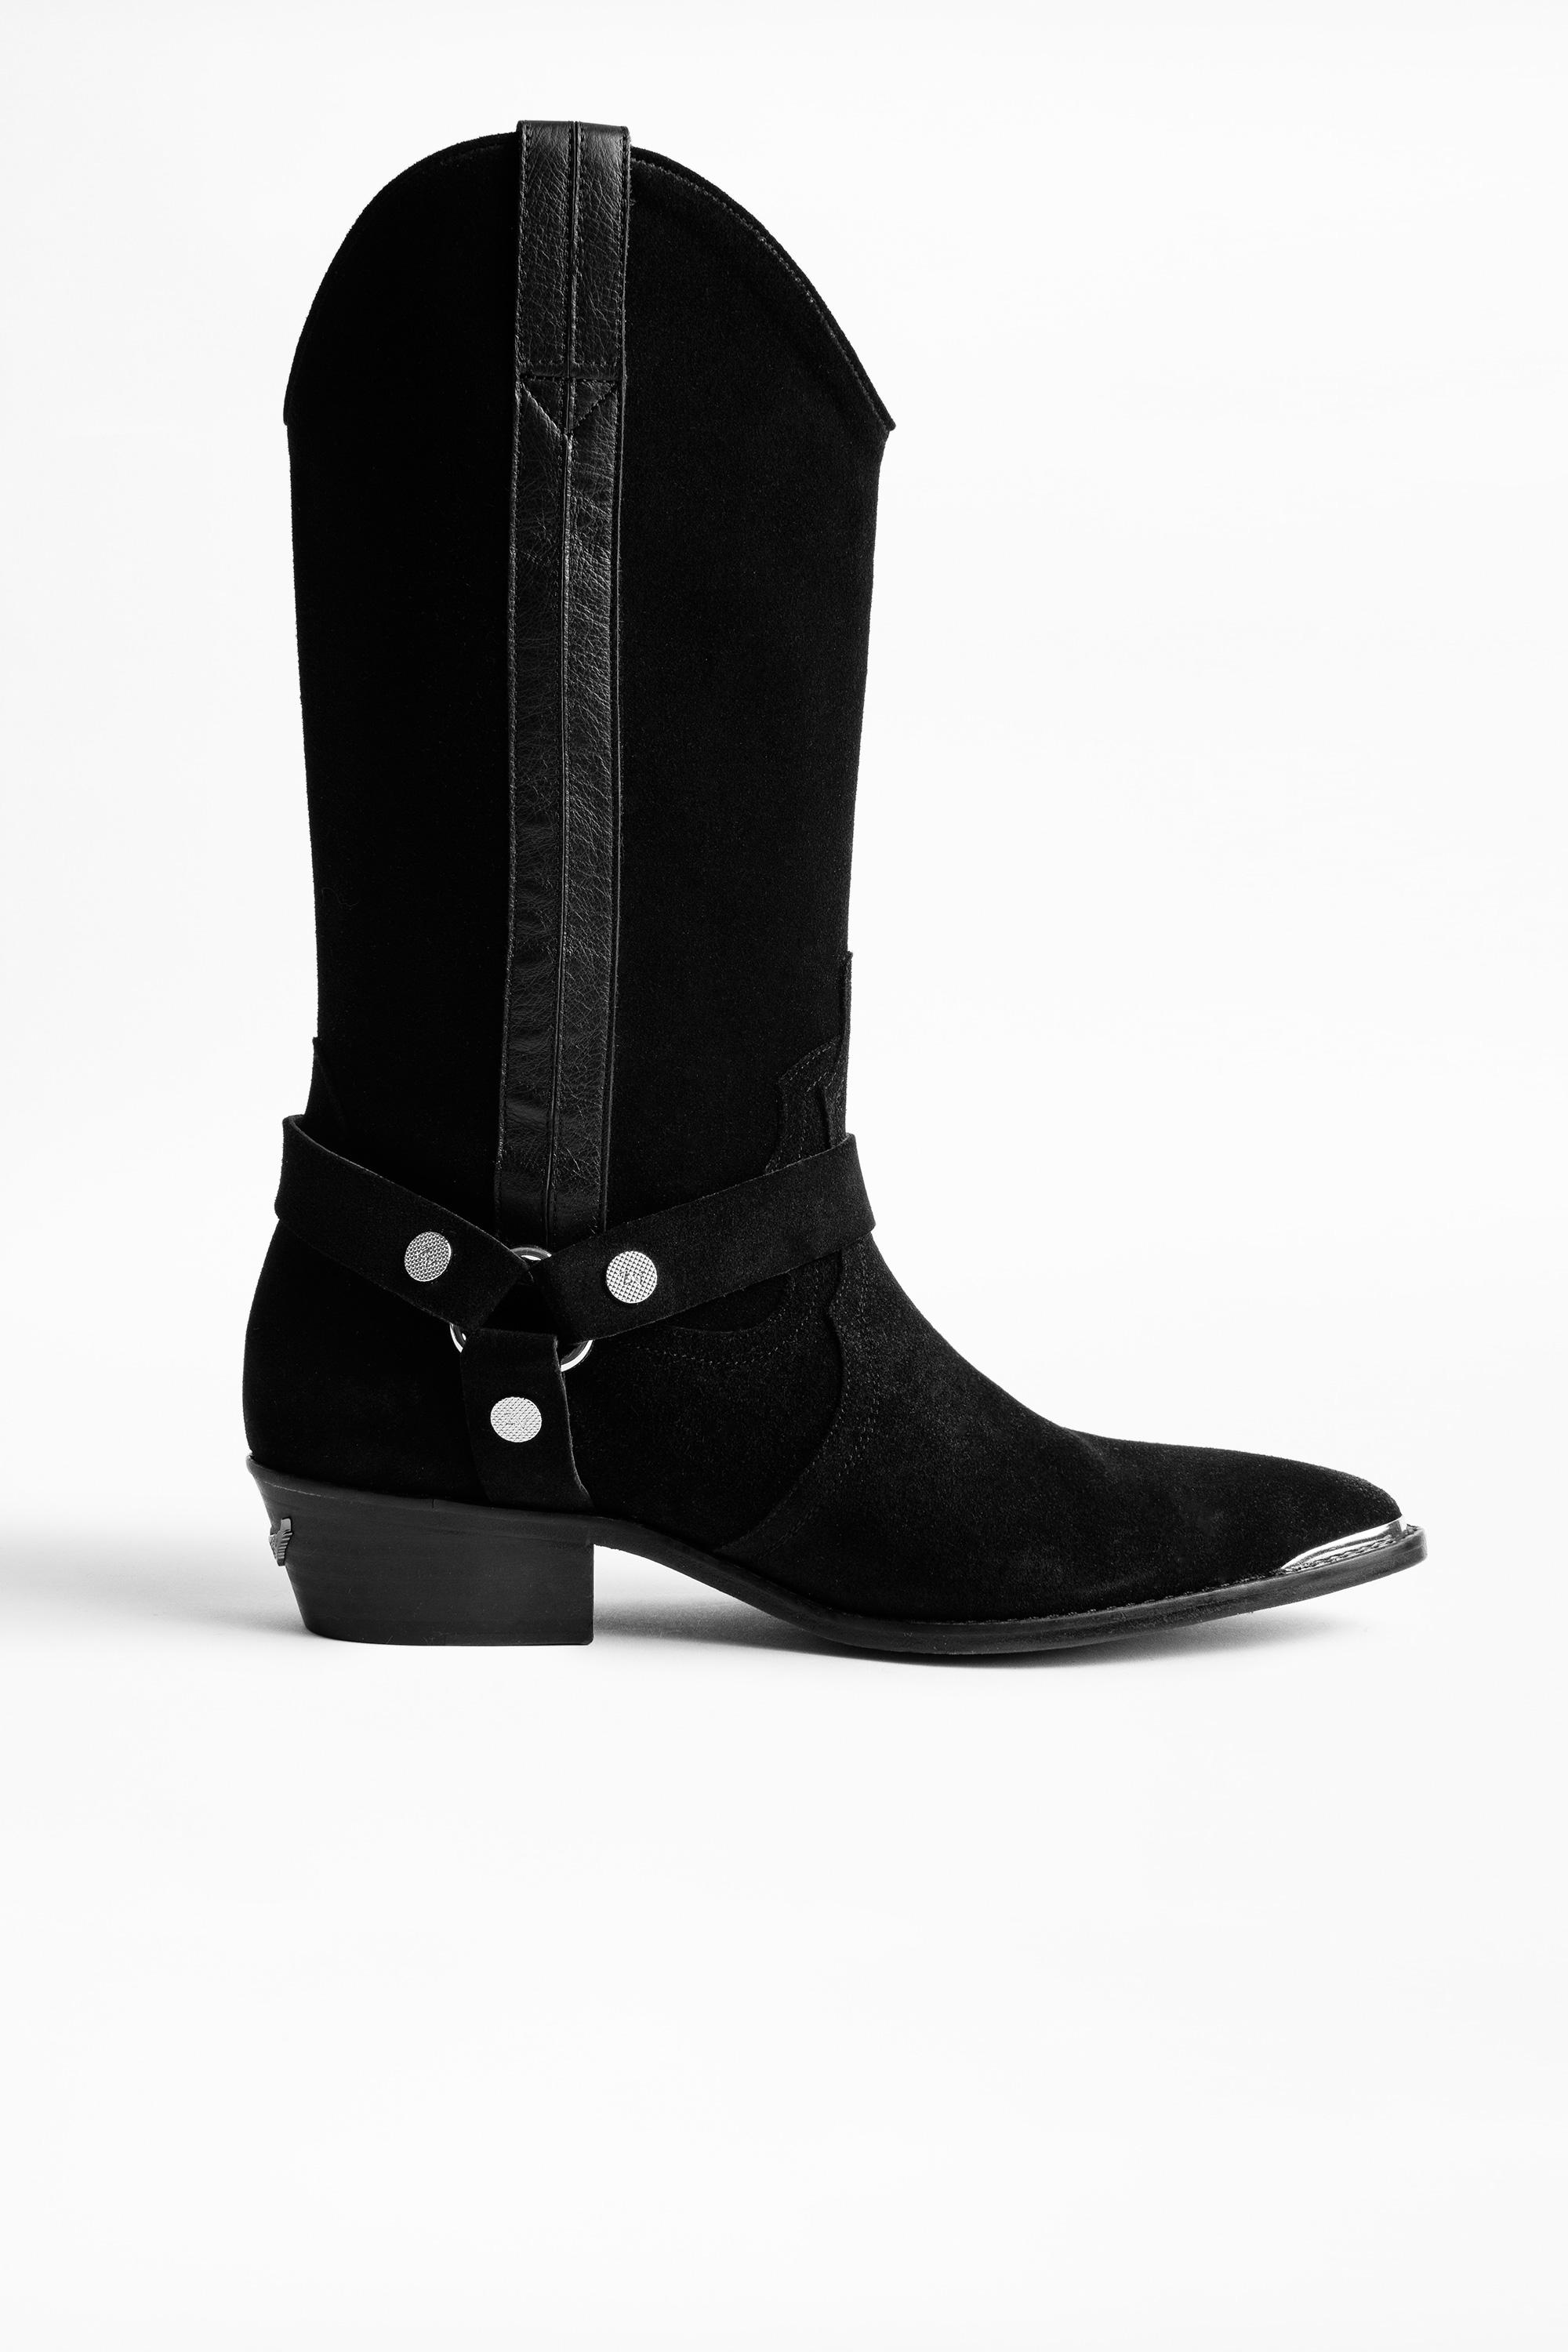 Zadig & Voltaire Leather Cruz Boots in Black - Lyst